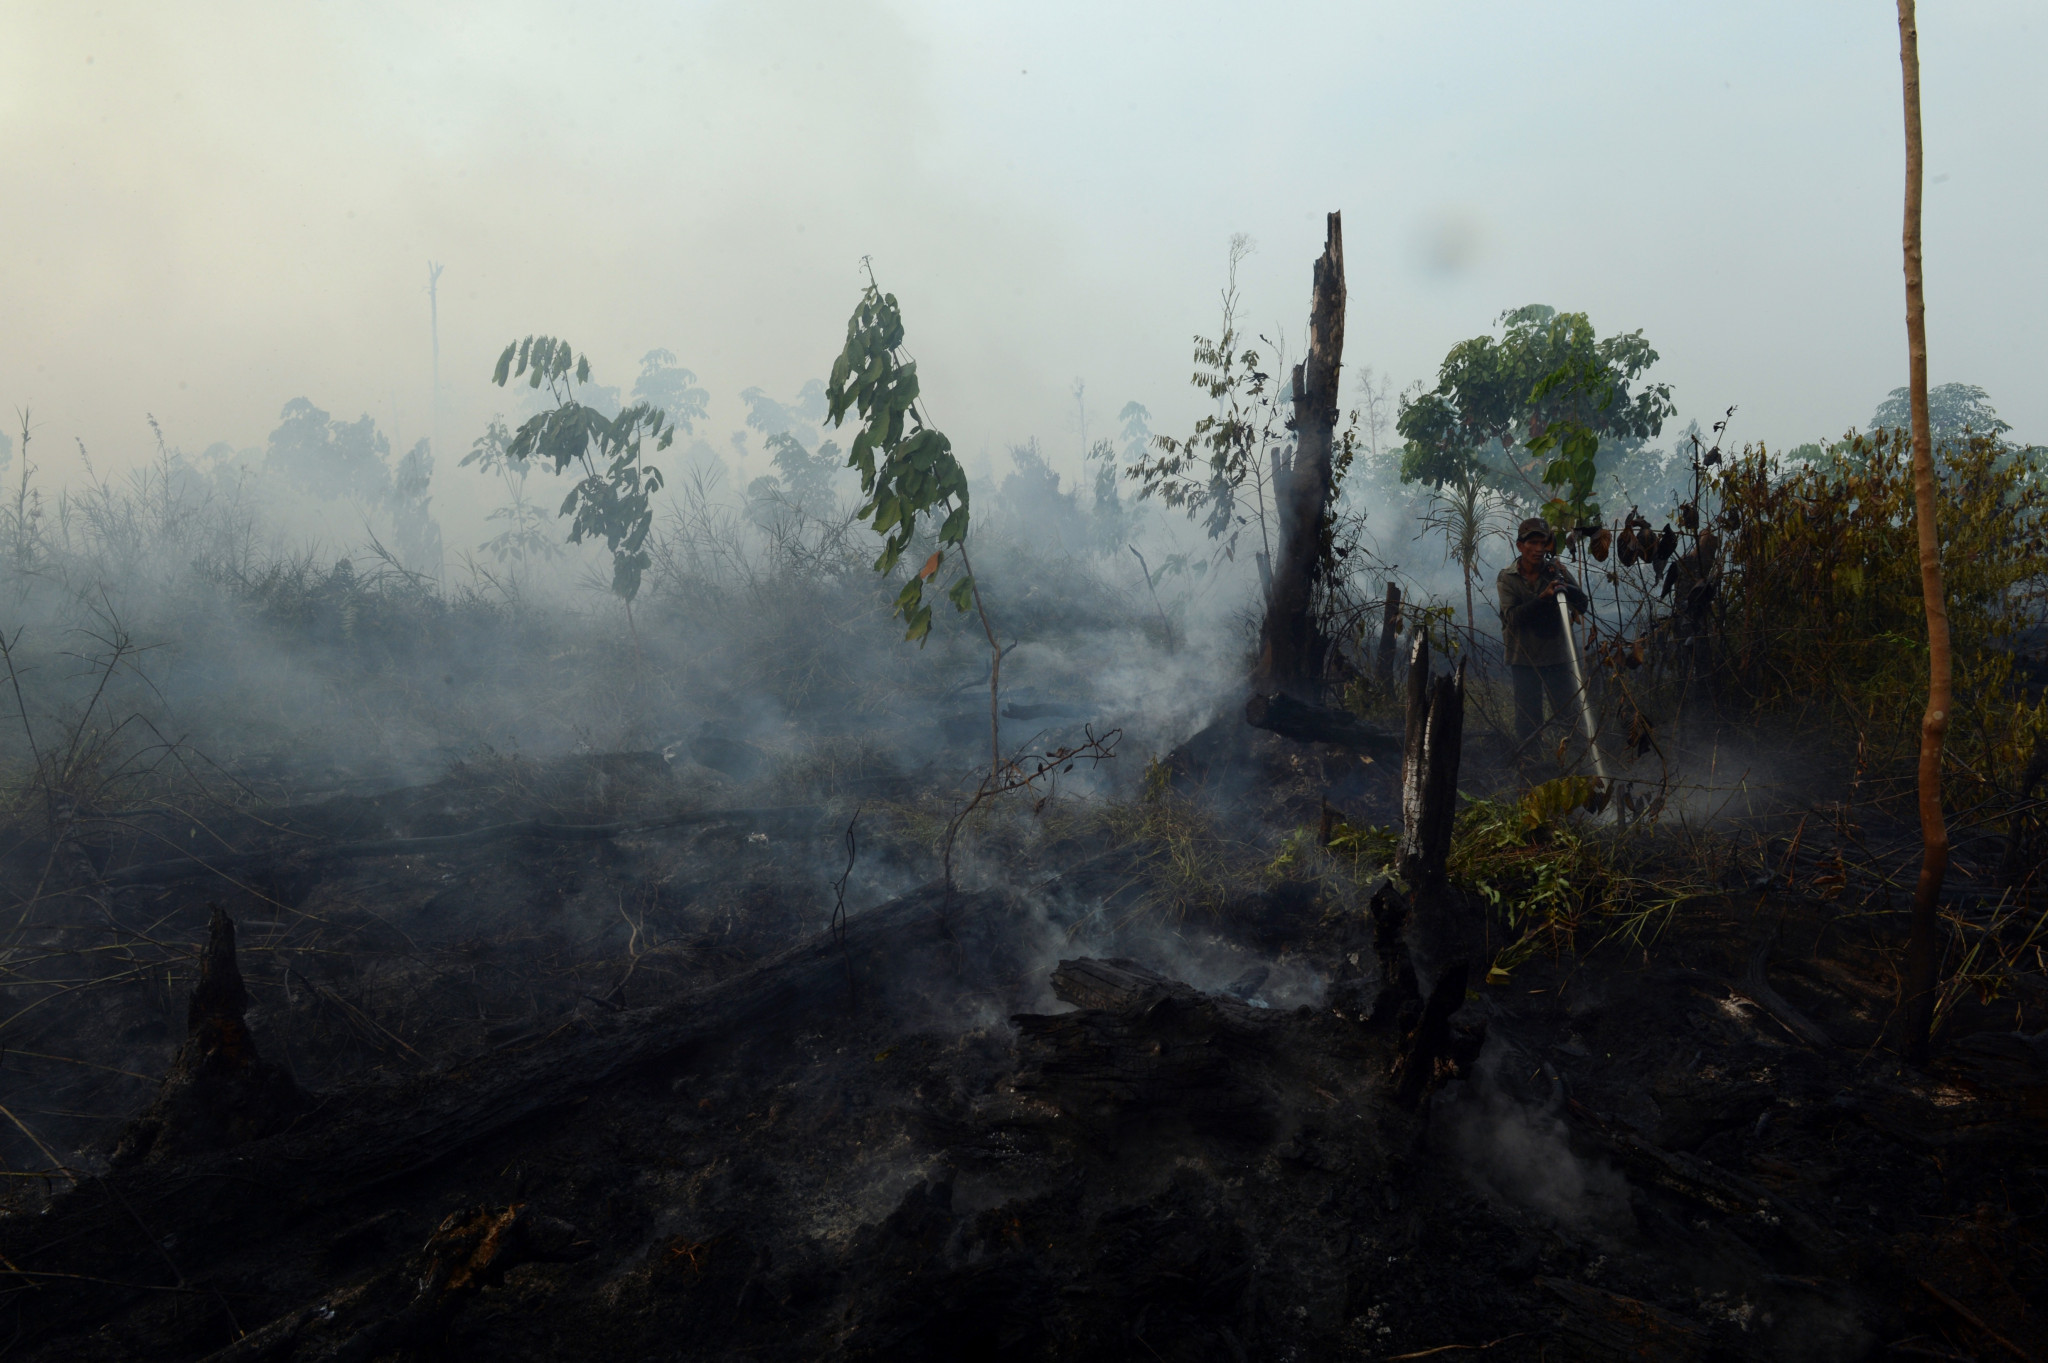 Indonesia has one of the highest deforestation rates in the world ©Getty Images